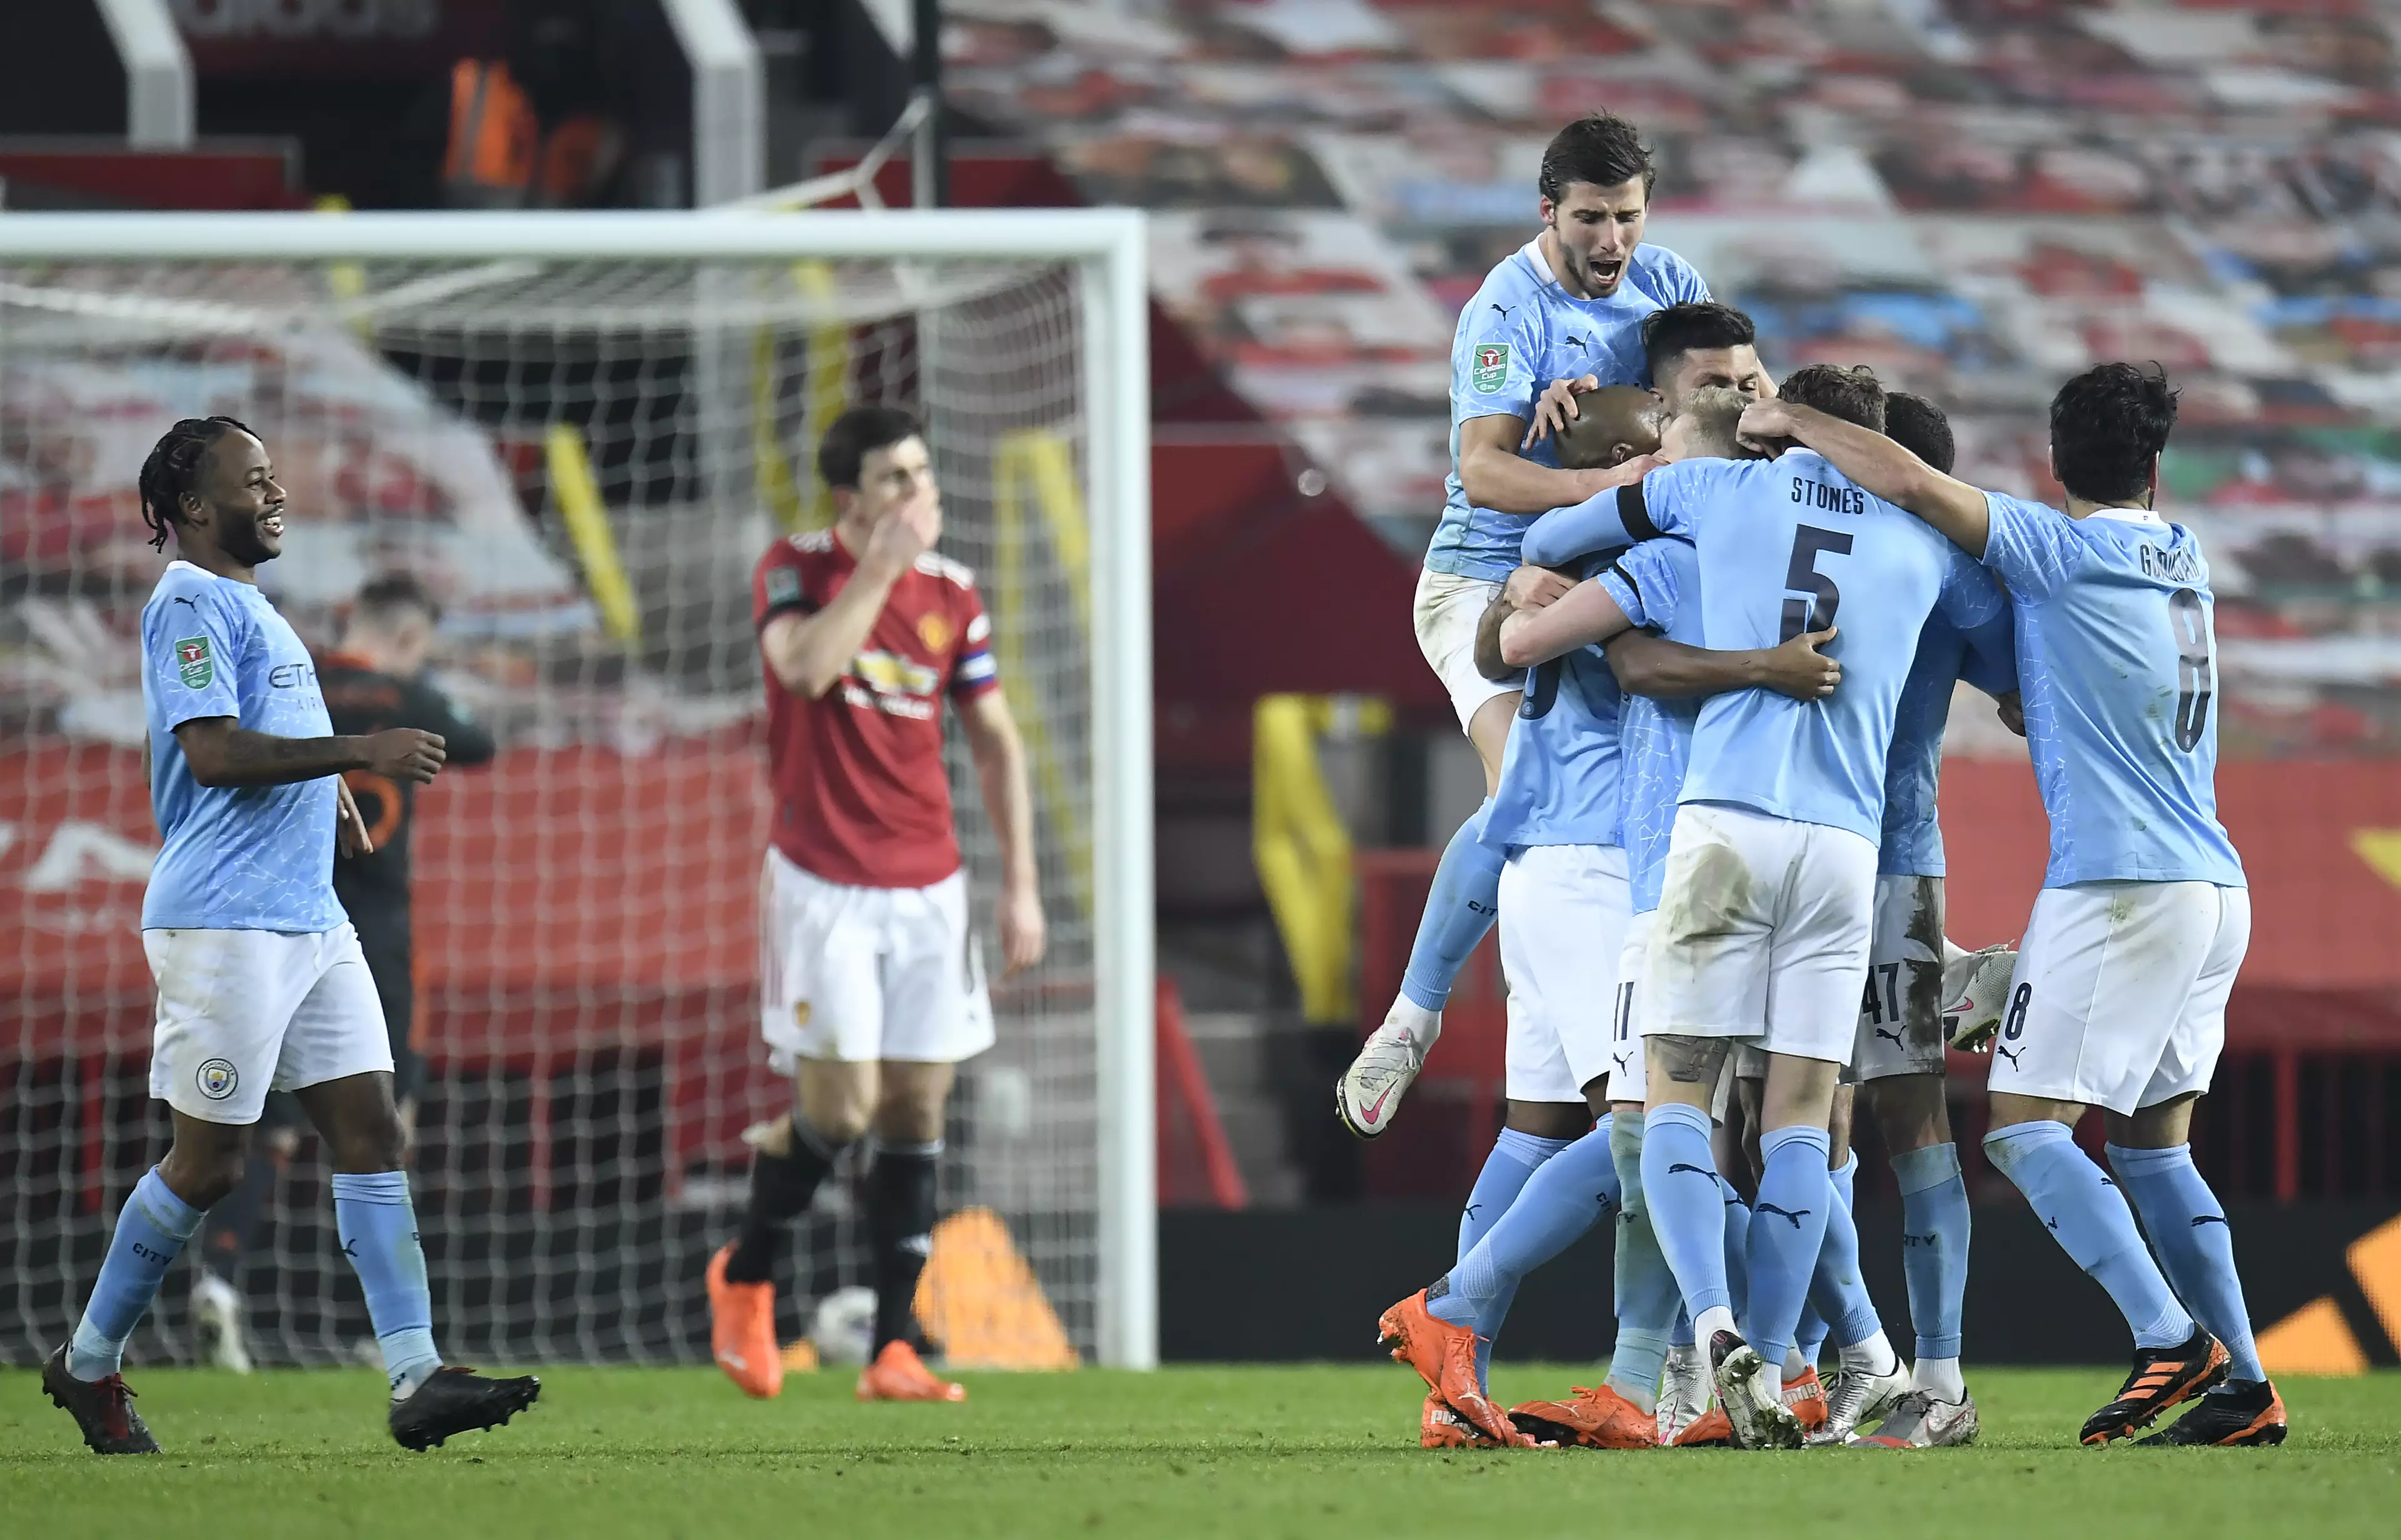 City celebrate their second goal. Image: PA Images